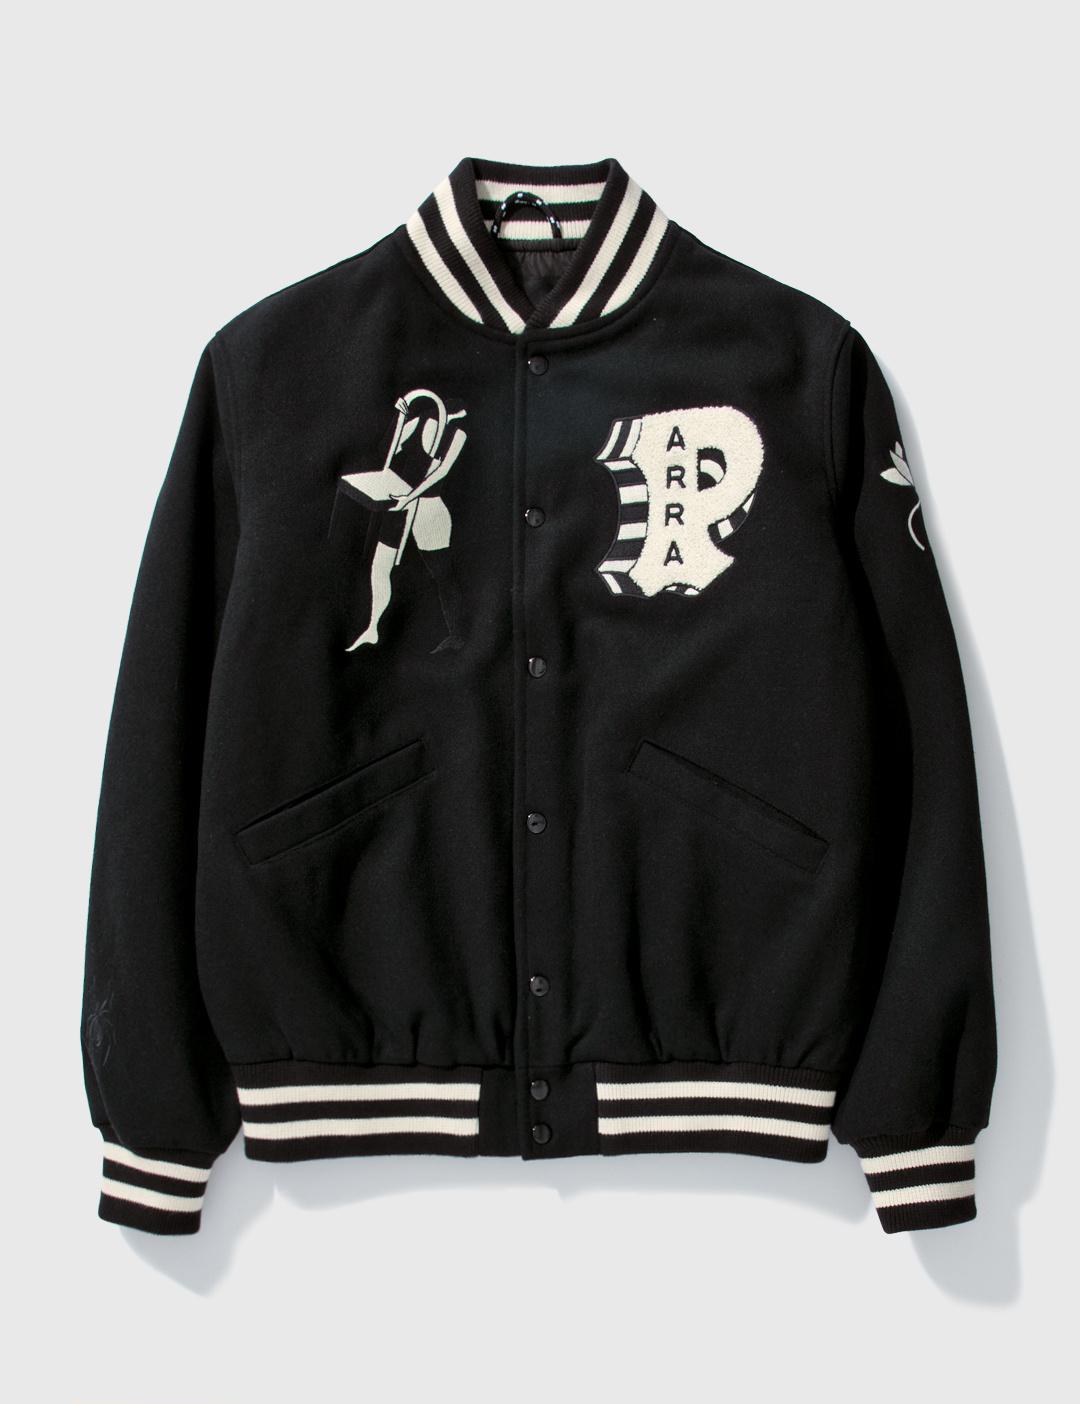 Cloudy Star Varsity Jacket by BY PARRA